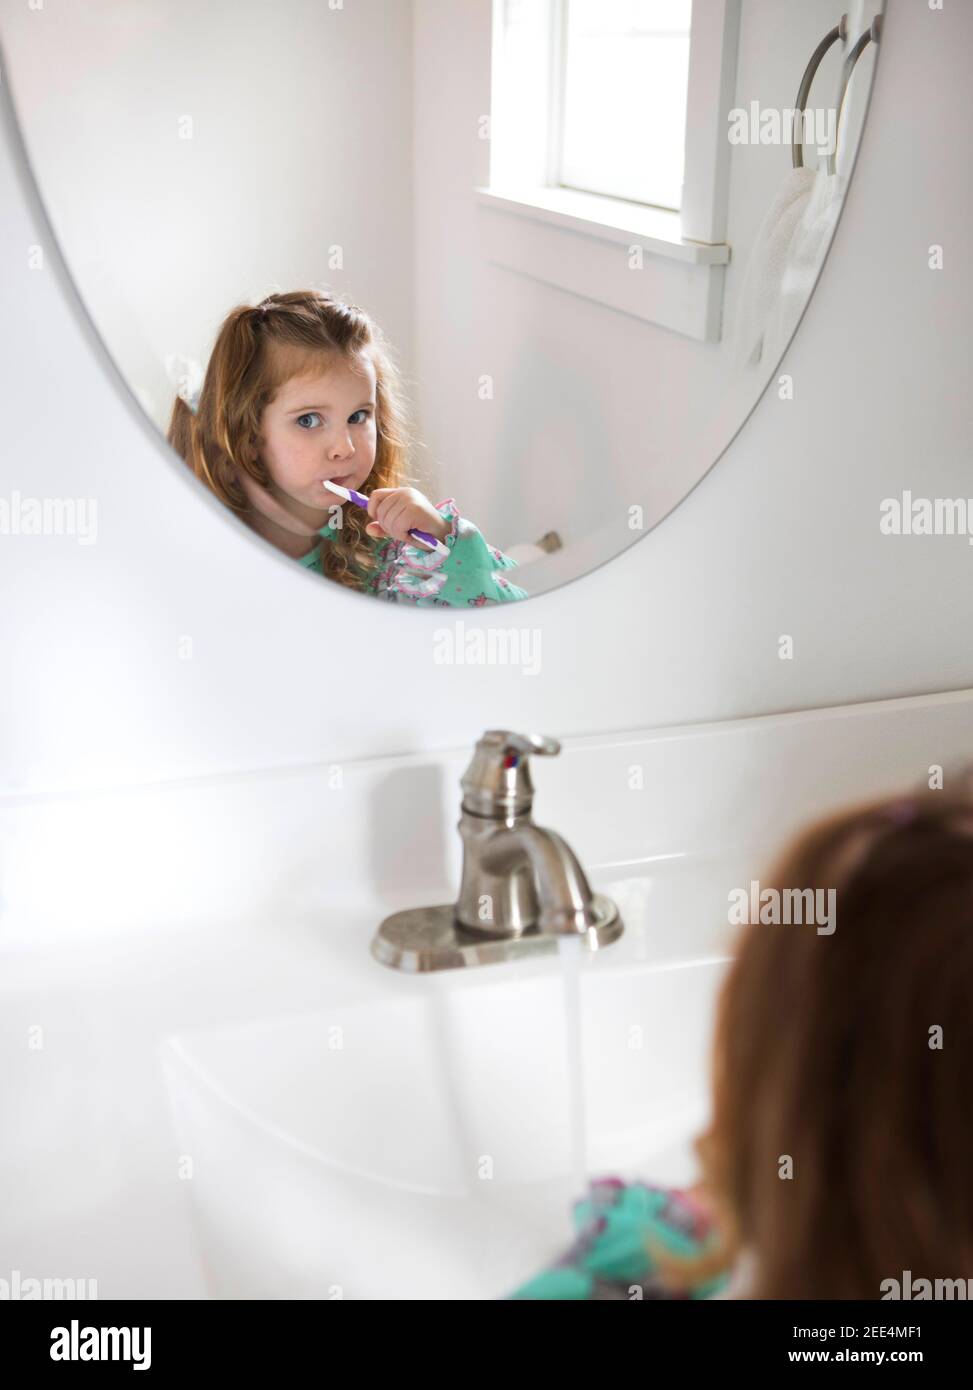 A little girl brushes her teeth in the bathroom mirror. Stock Photo